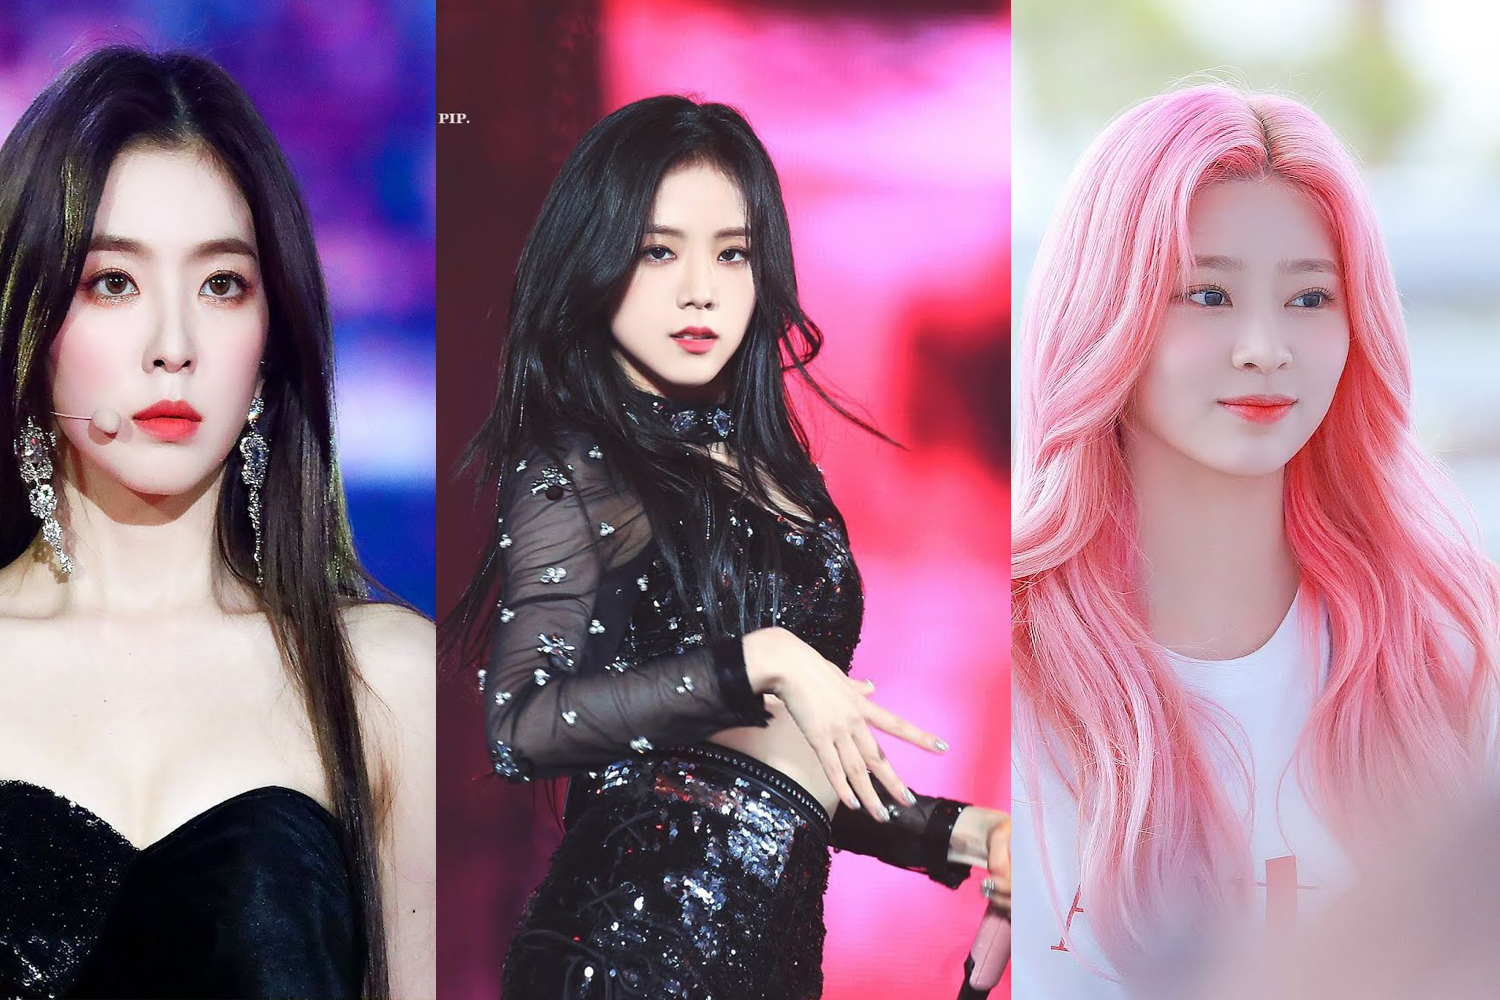 Voting The Top Visuals Of 3rd Generation Female Idols